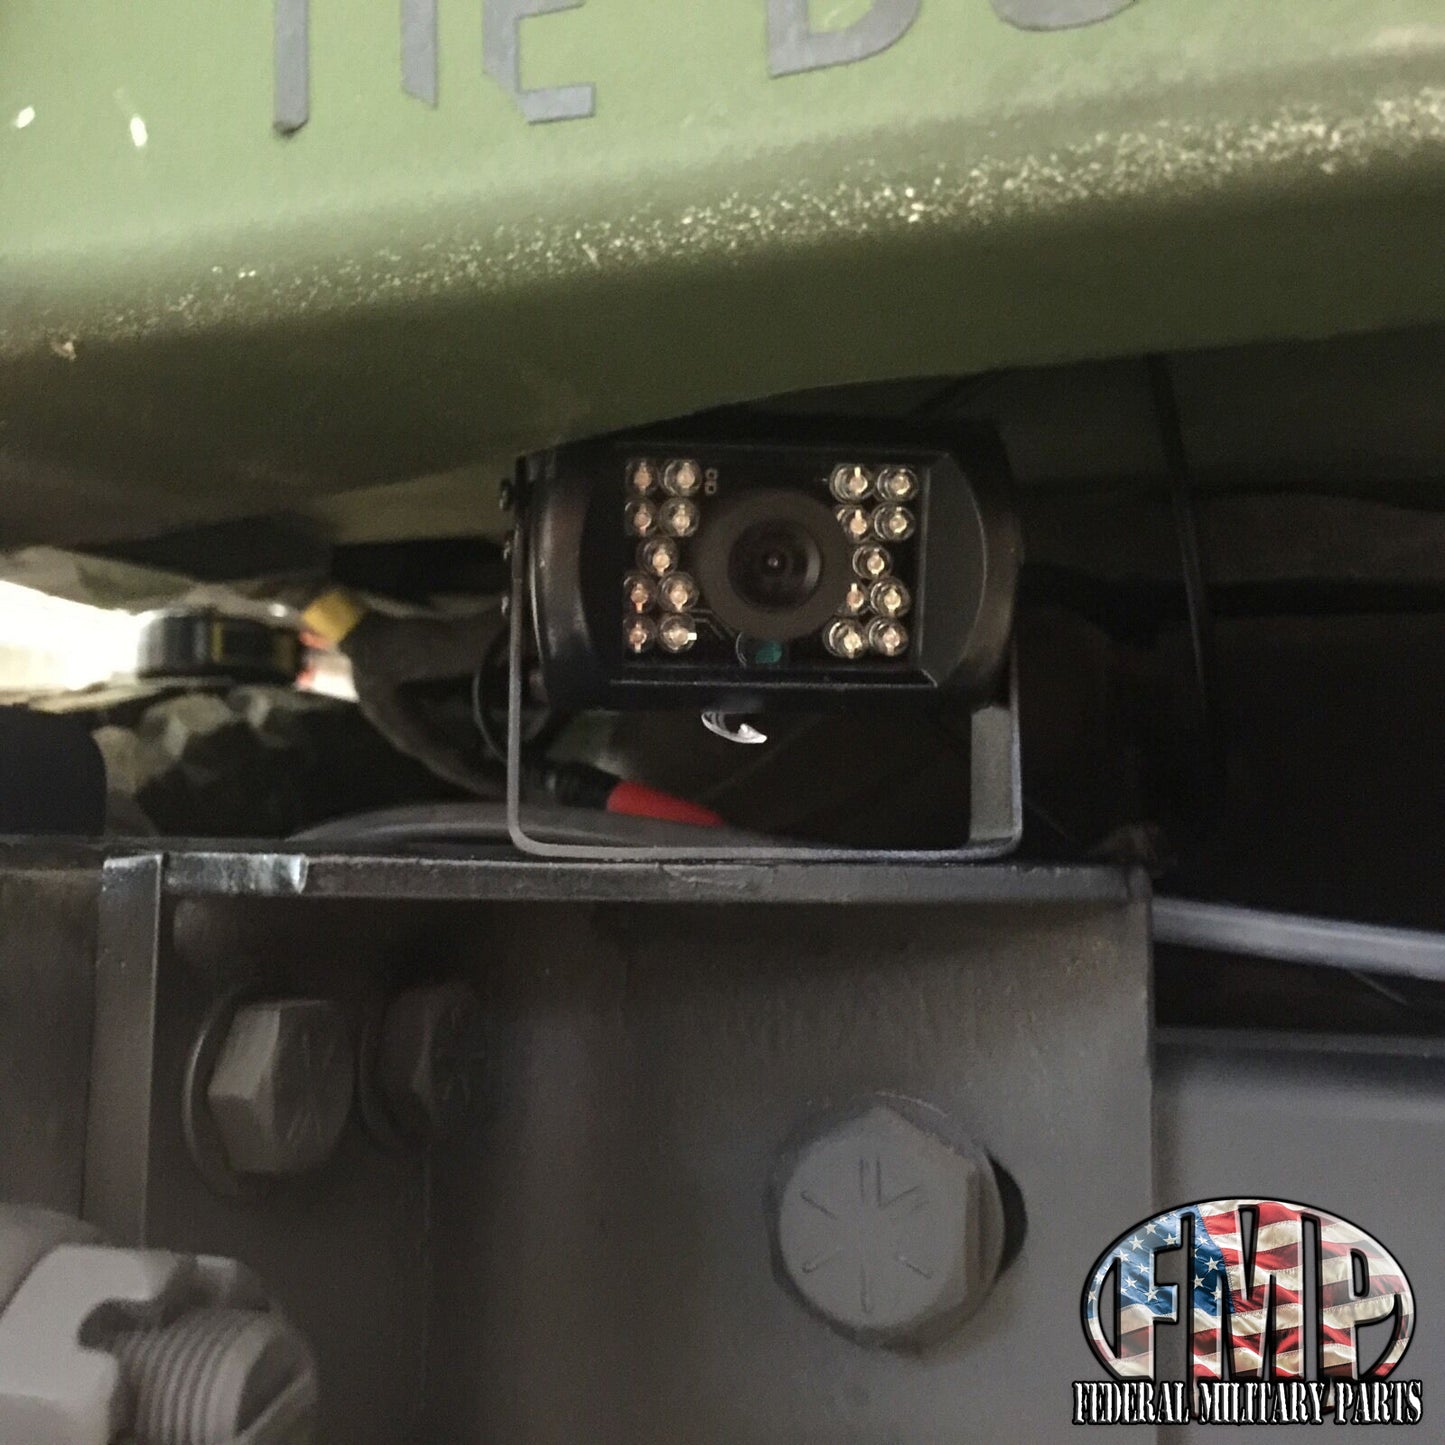 PREMIUM PLUG AND PLAY HUMVEE REAR LICENSE PLATE HOLDER BRACKET FRAME - NO DRILLING TO INSTALL - M998 HMMWV